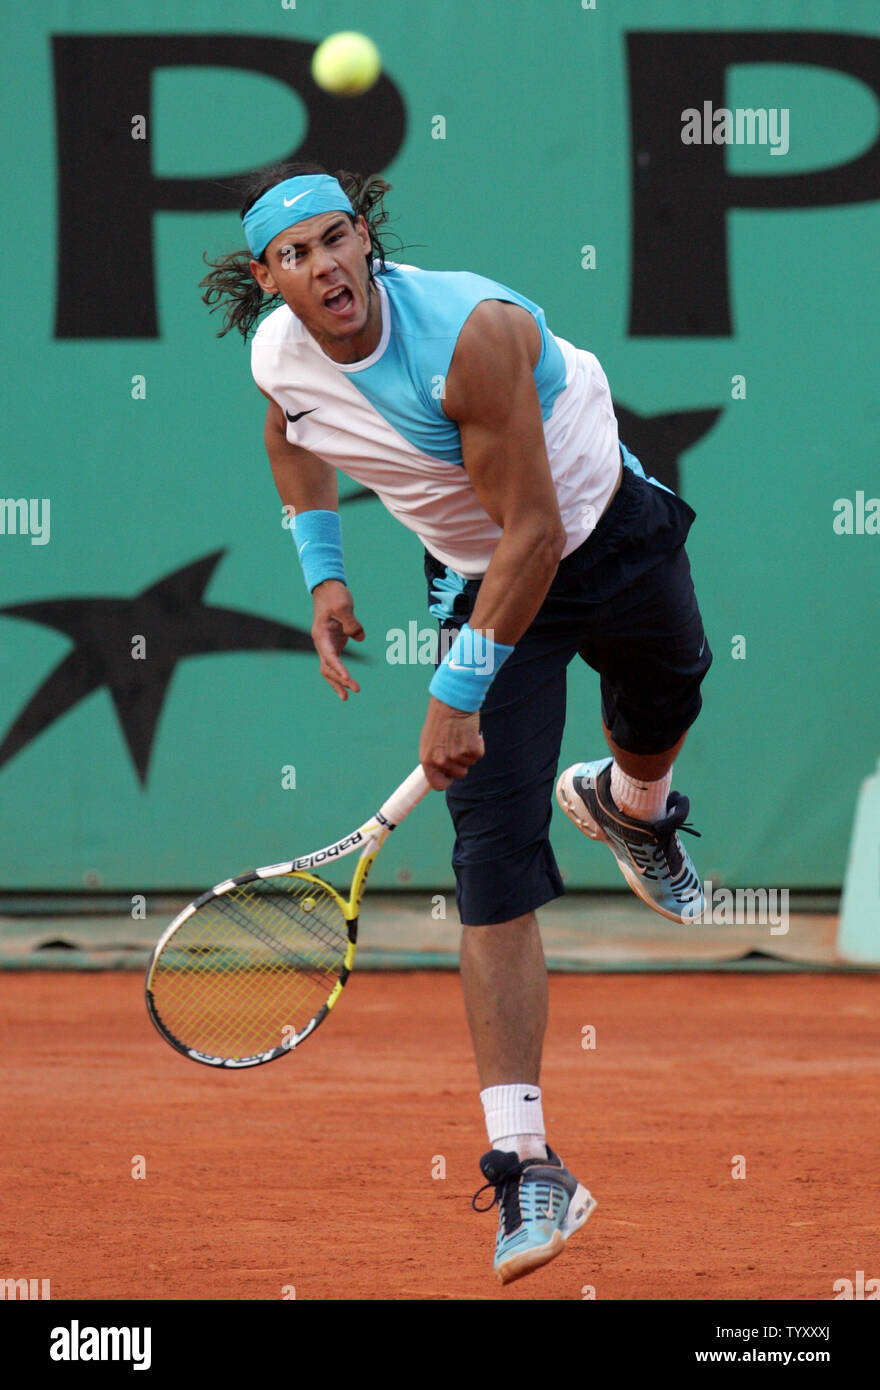 Rafael Nadal of Spain serves during his first round match against Juan  Martin Del Porto of Argentina at the French Open in Roland Garros, near  Paris on May 29, 2007. Nadal won